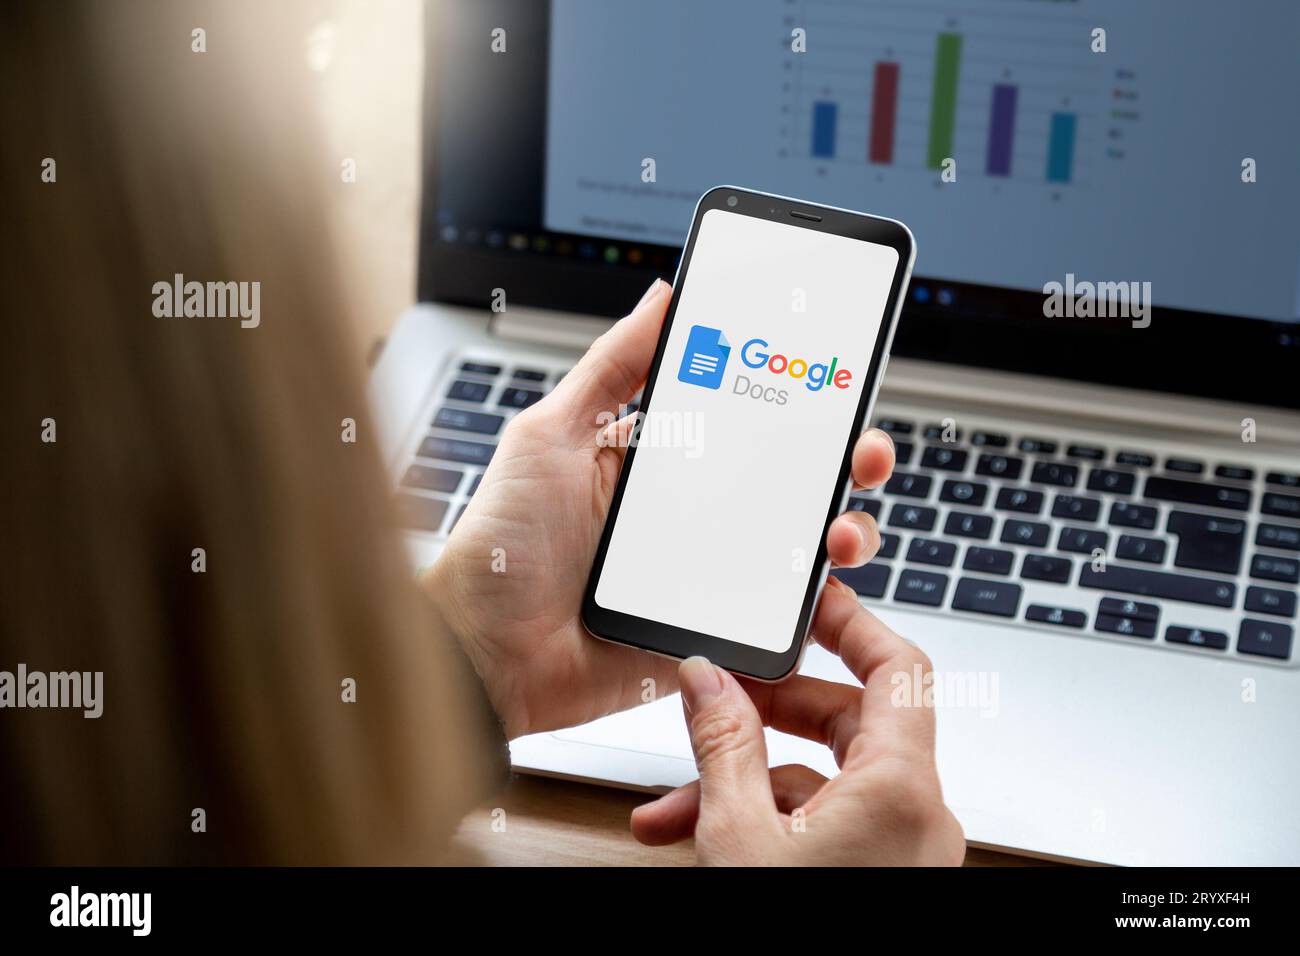 Smartphone with Google Docs application on screen. Close up view of mobile phone holding by a woman. Stock Photo